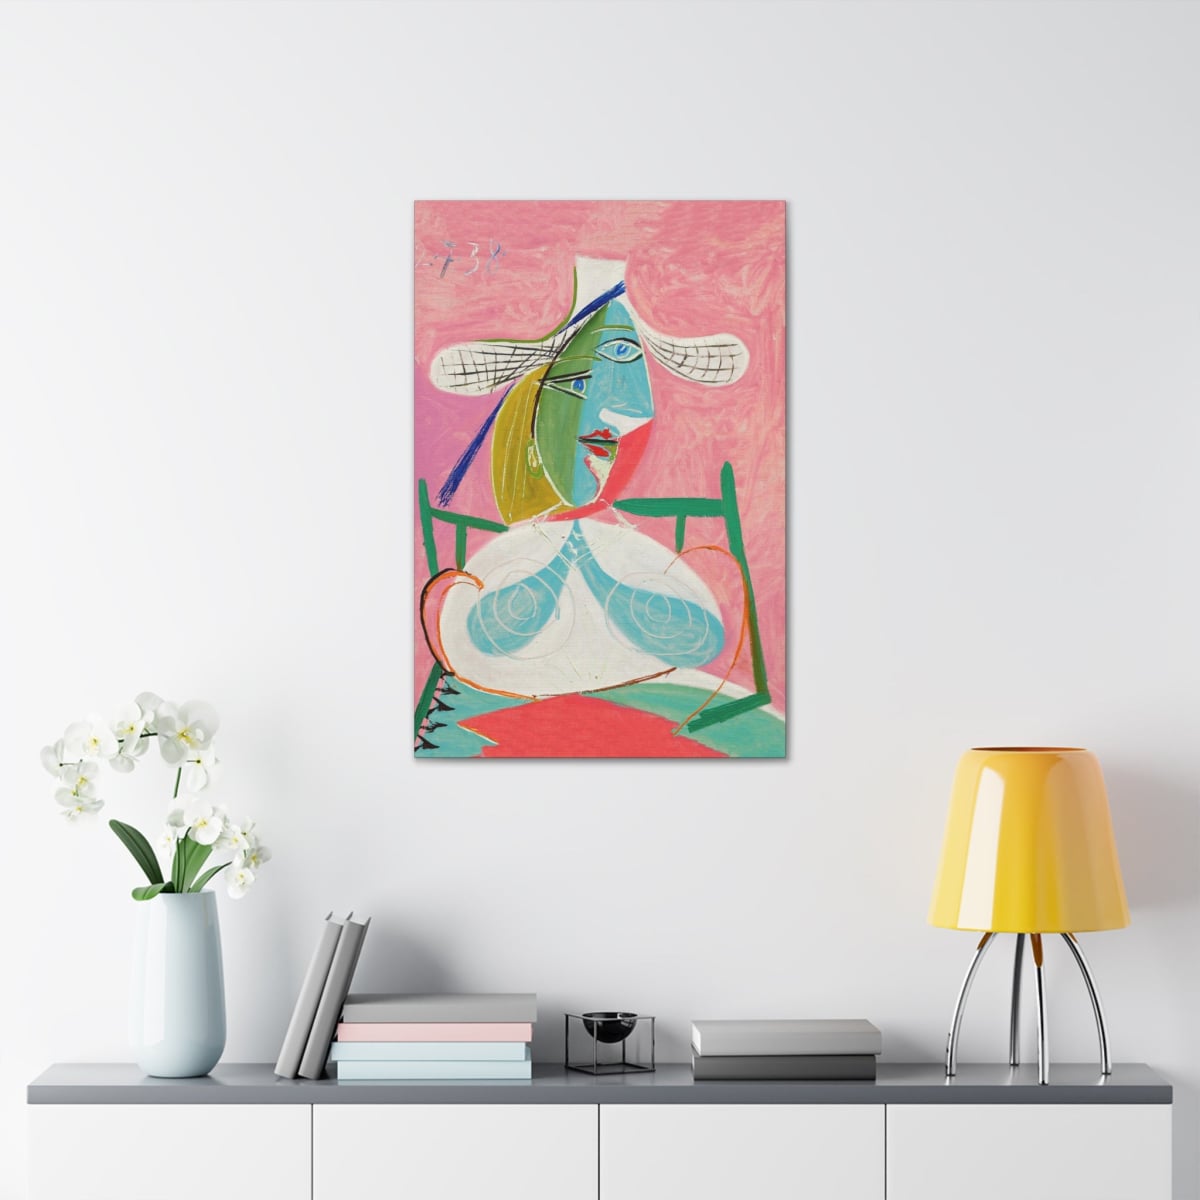 Pablo Picasso’s Seated Woman with a Straw Hat - Canvas Gallery Wrap